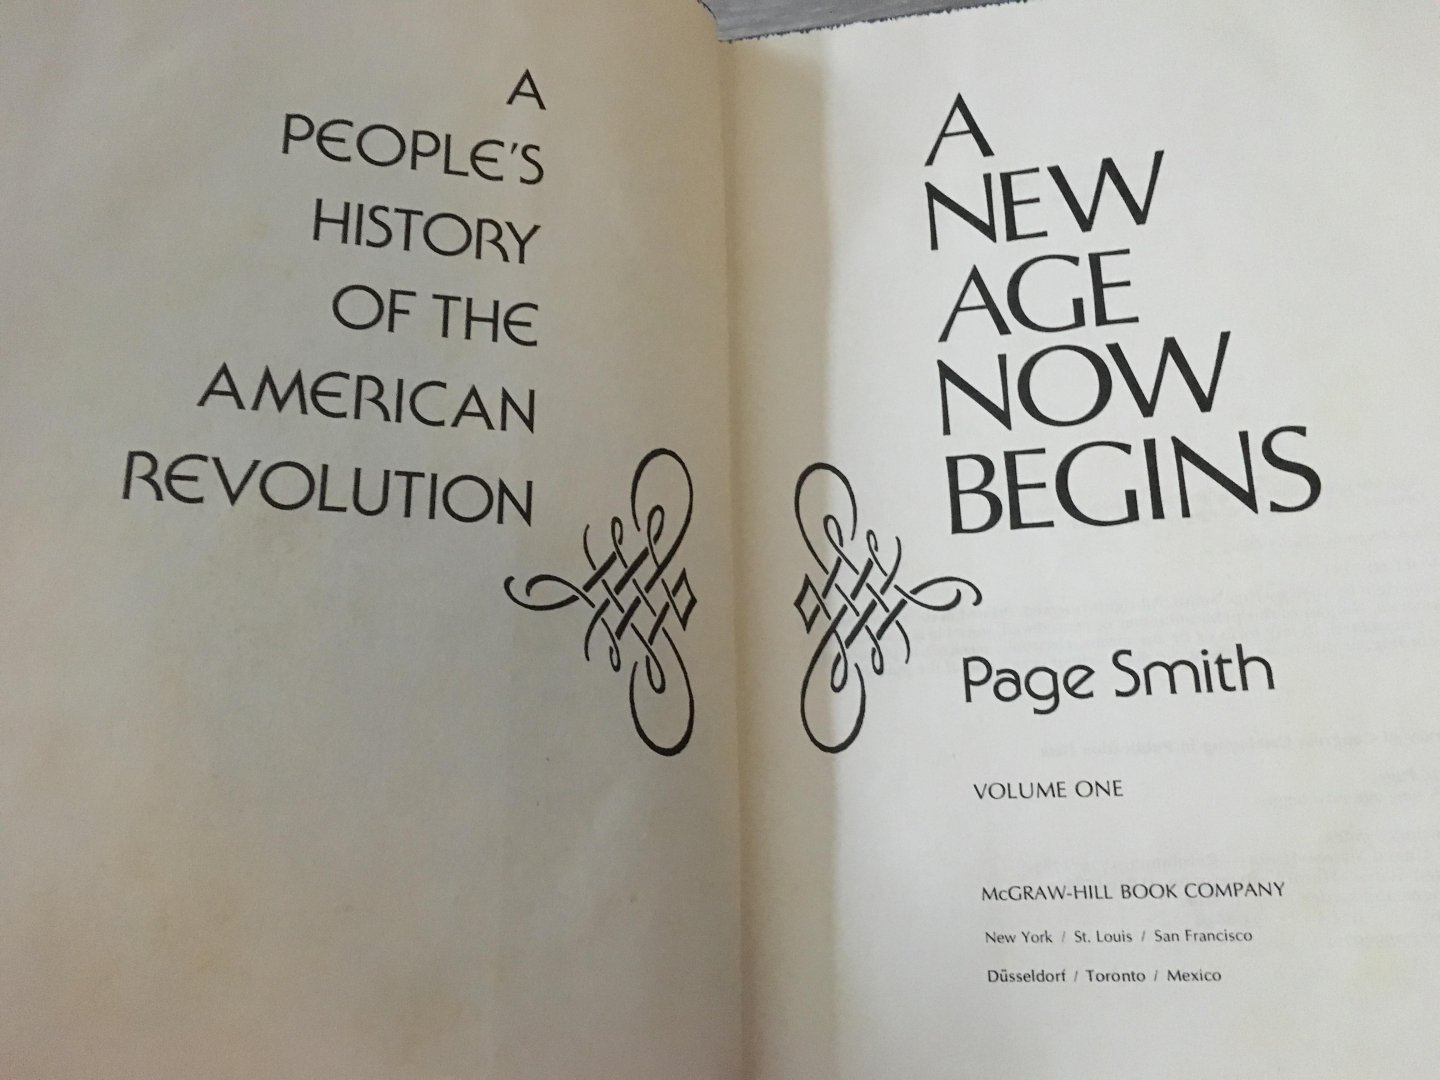 Page Smith - A New Age Now Begins, Page Smith, 1976